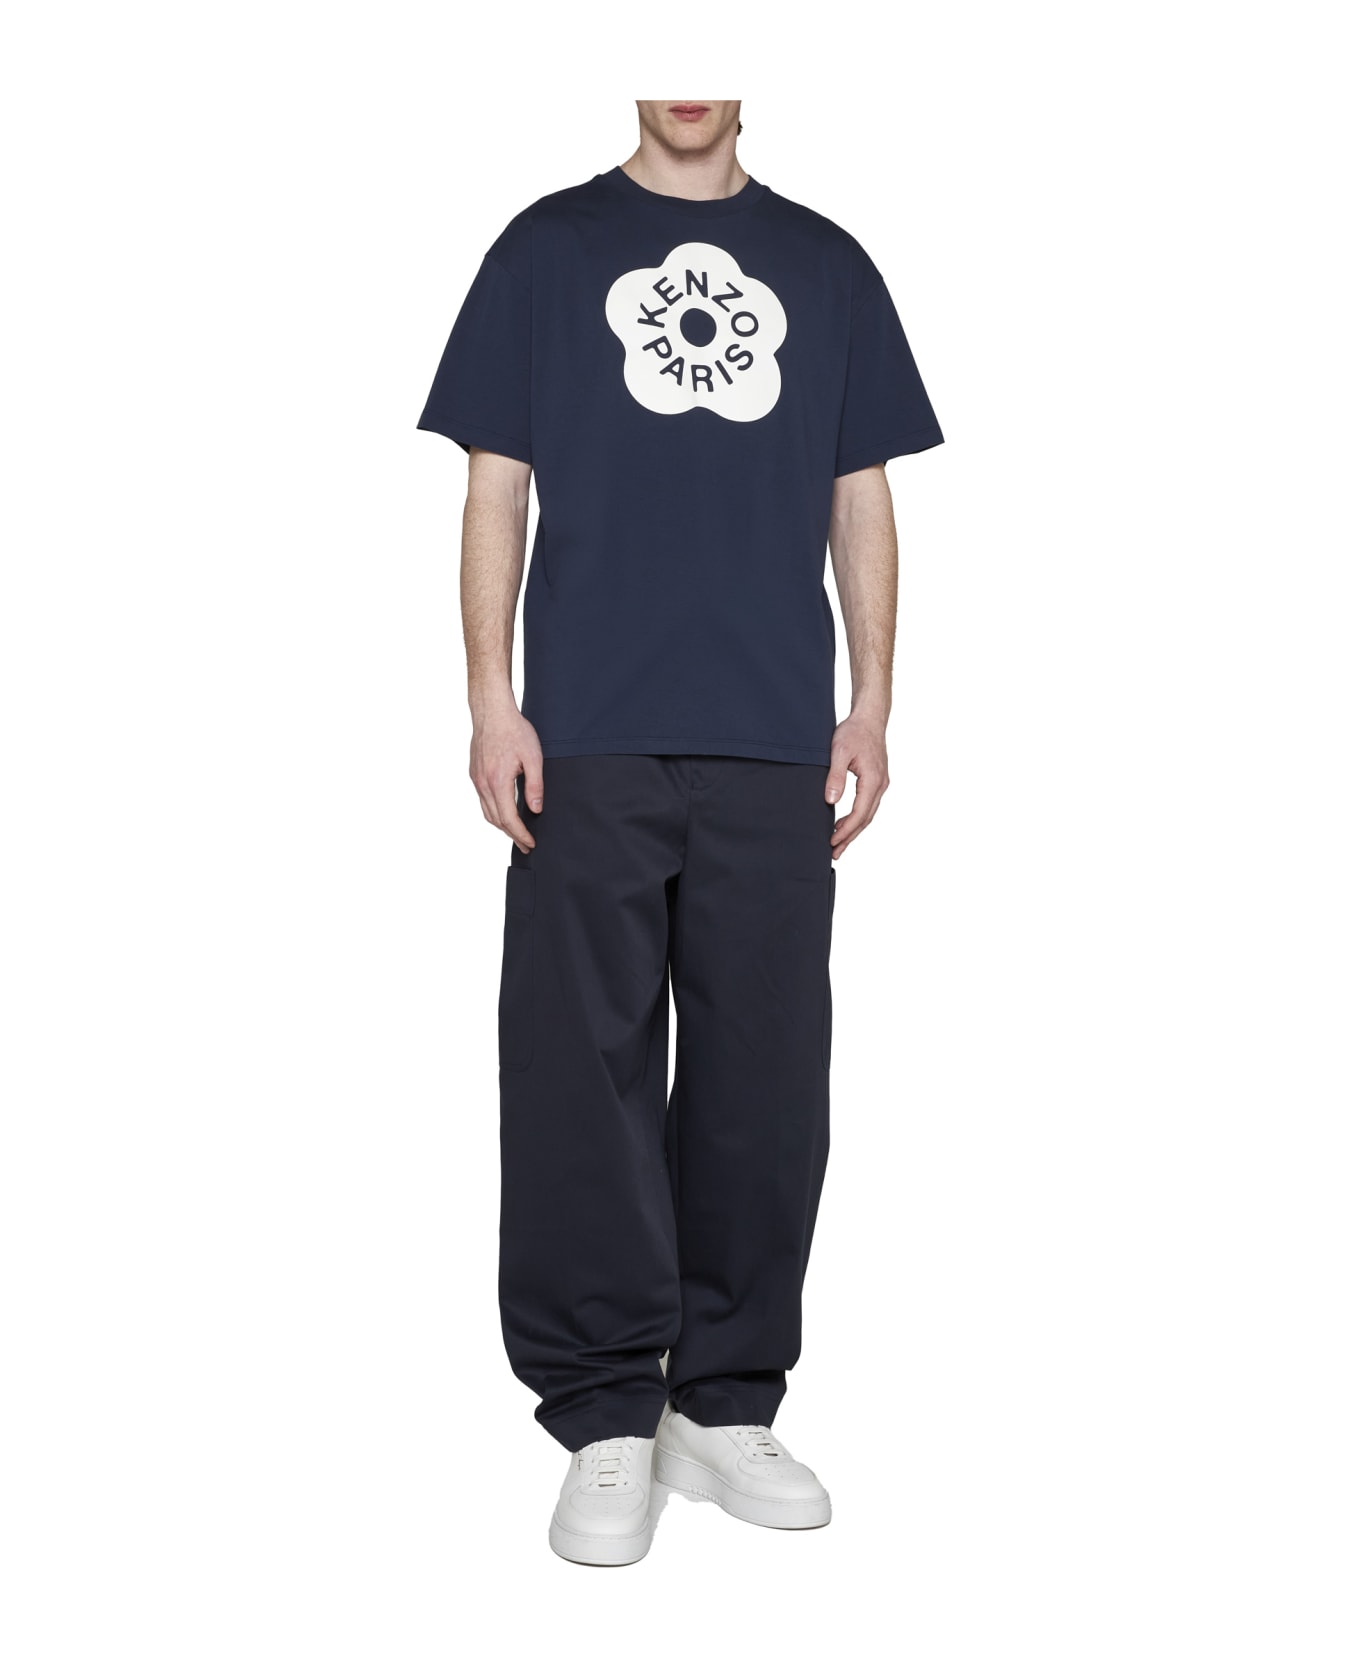 Kenzo Cargo Pants With Drawstring And Logo Patch - blue